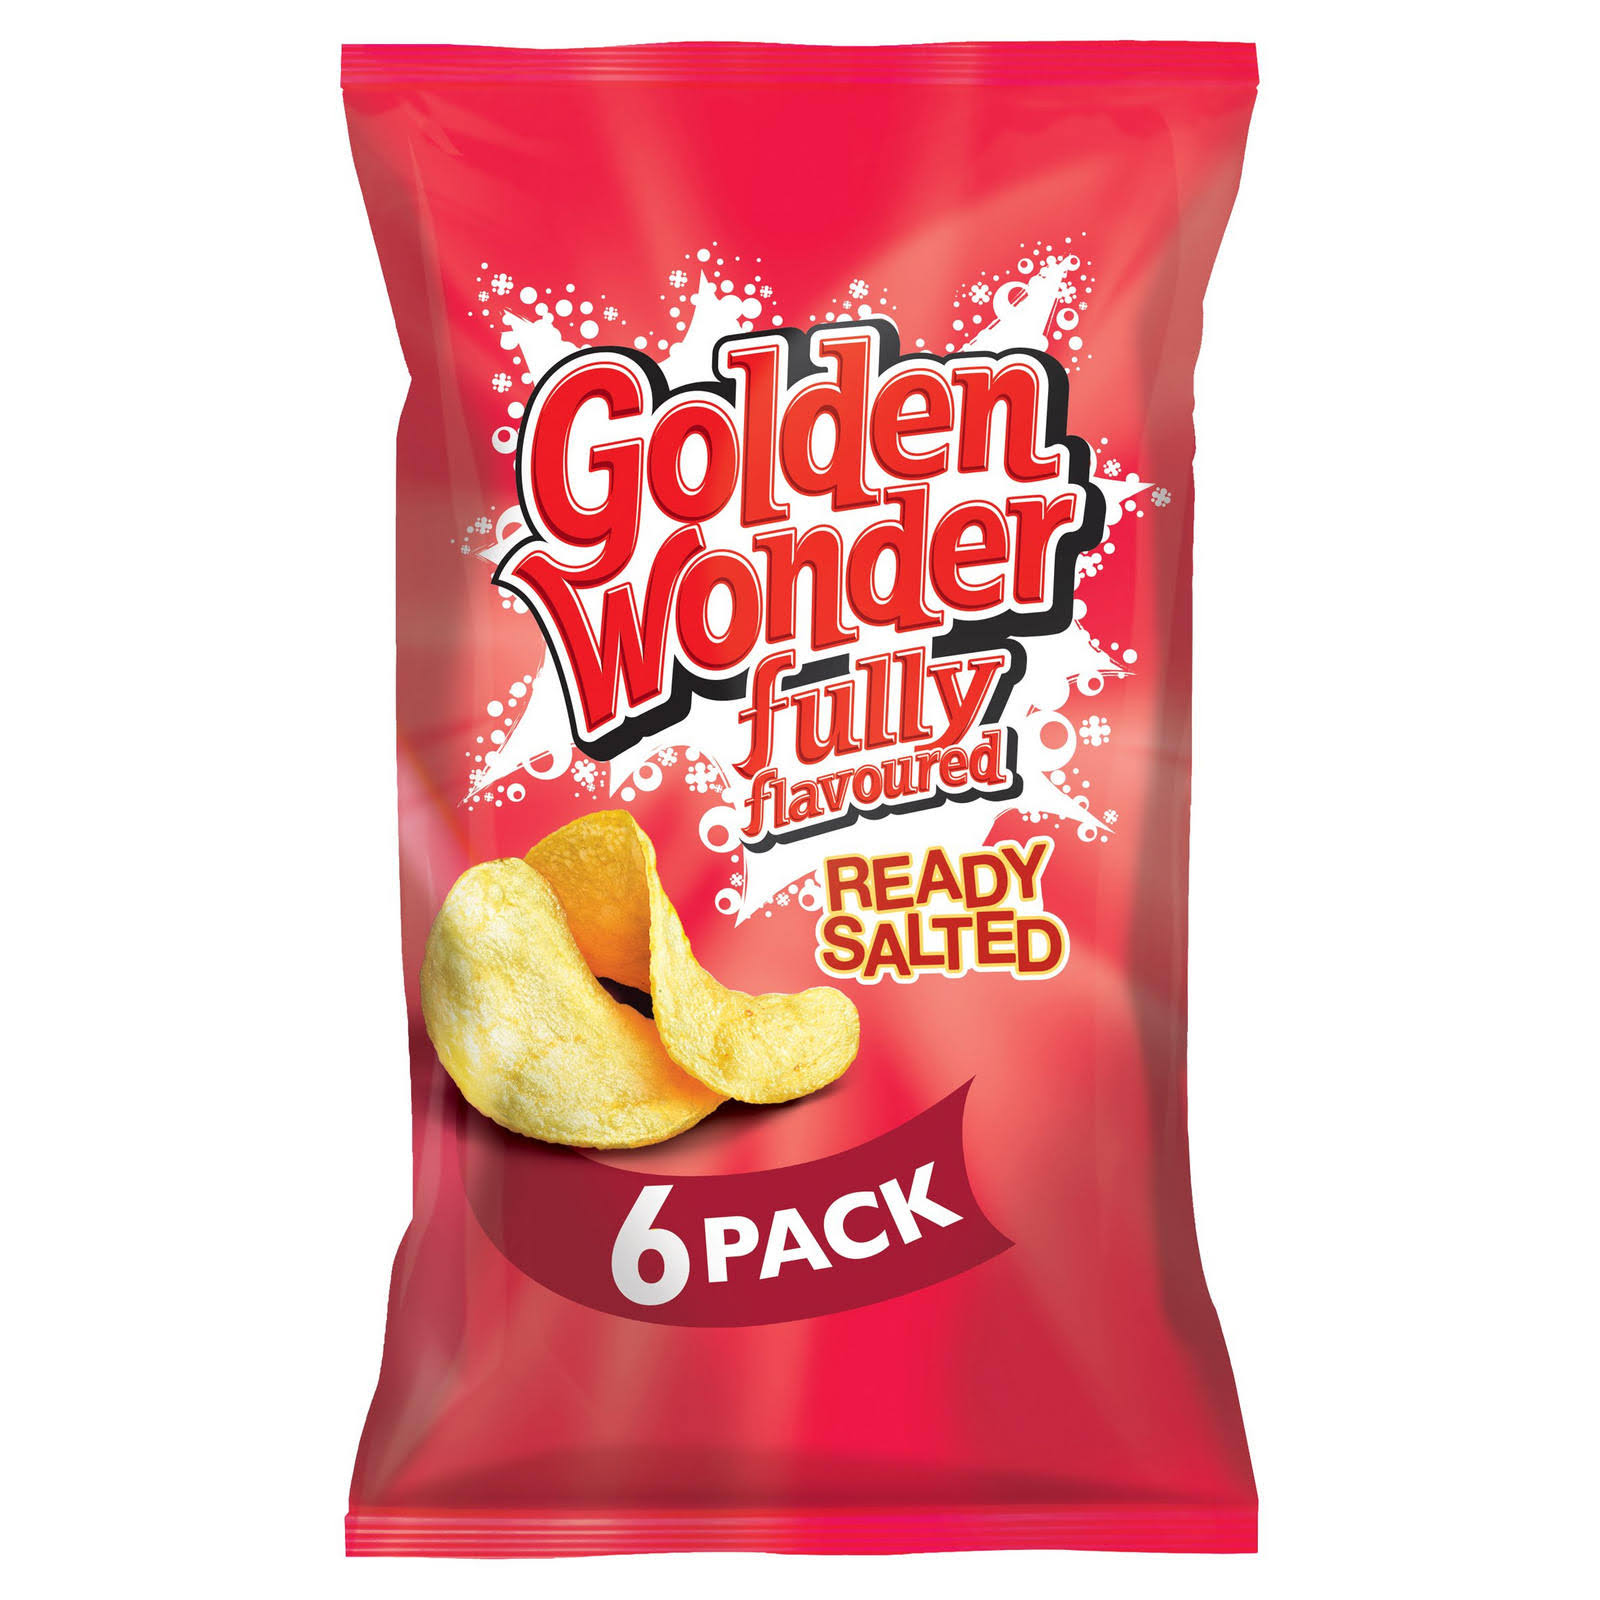 Golden Wonder Ready Salted 6 Pack Delivered to Canada